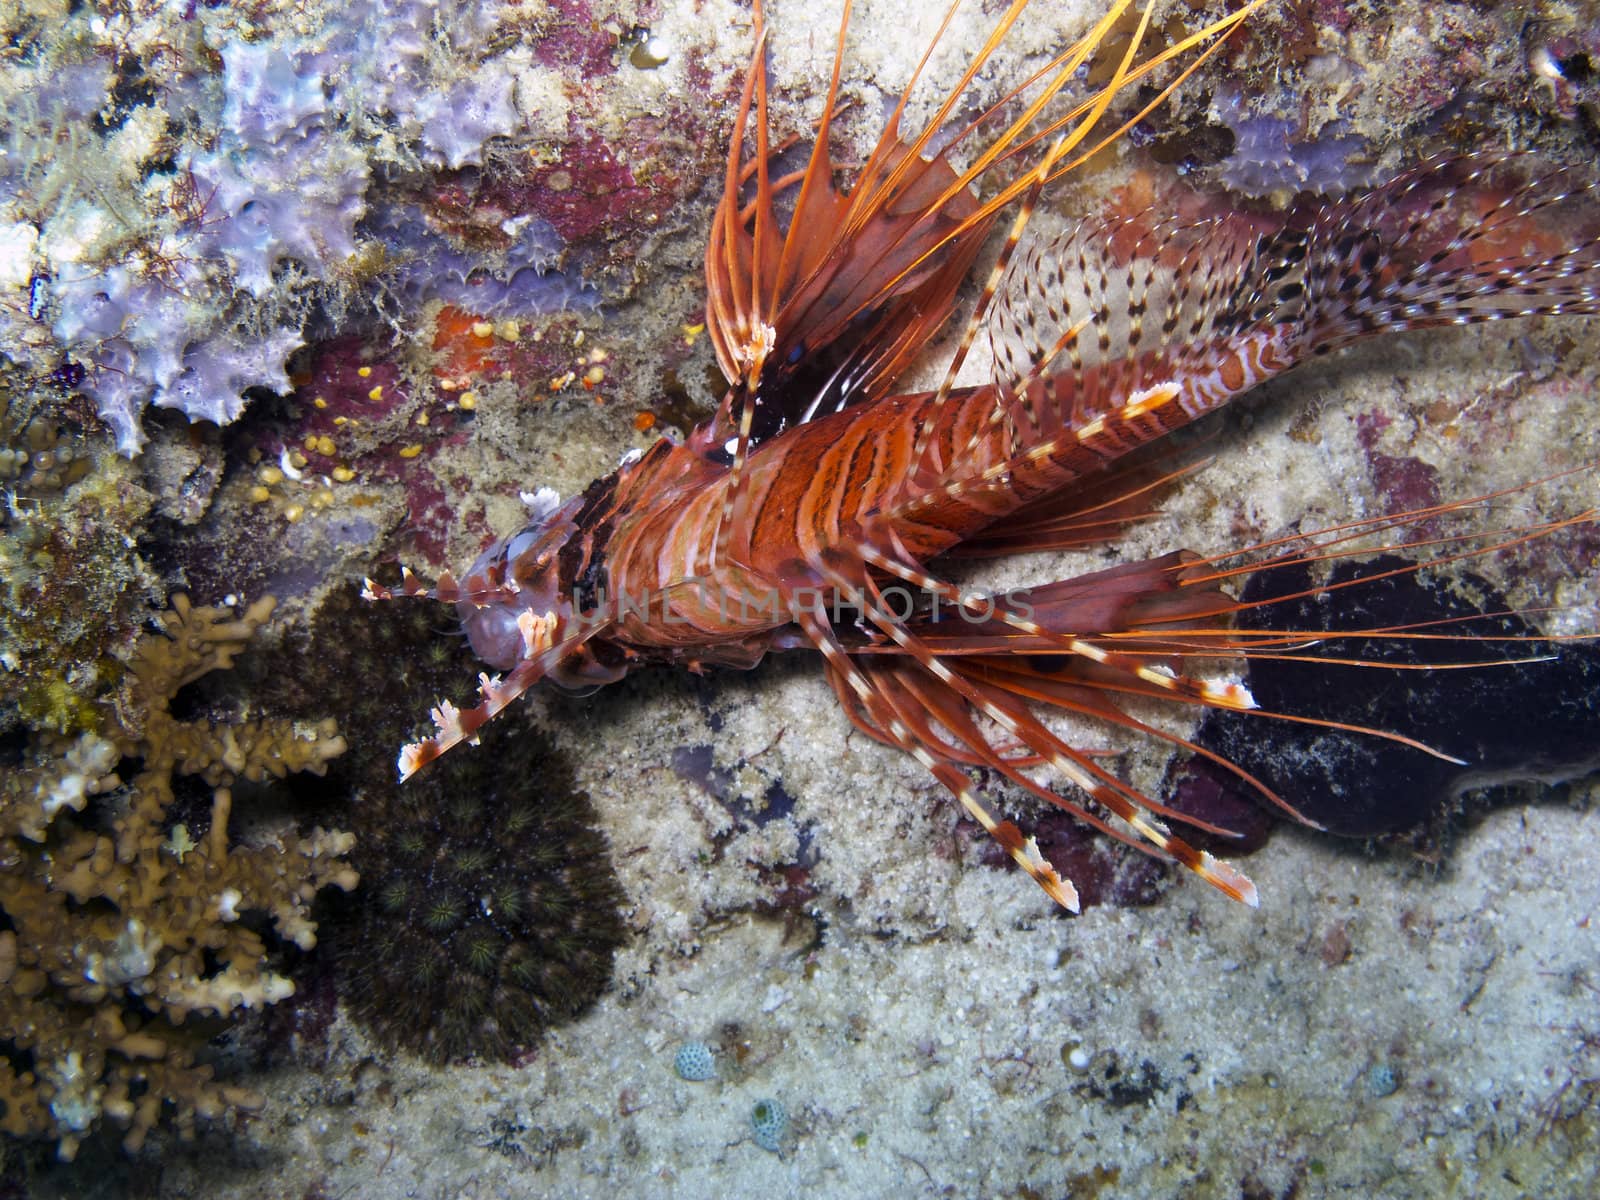 Lionfish are known for their venomous fin rays. Stings from this lionfish can cause  nausea, fever, breathing difficulties, convulsions, and sweating. It has also been known to cause death in some cases.







Spot fin Lionfish (Pterois antennata)